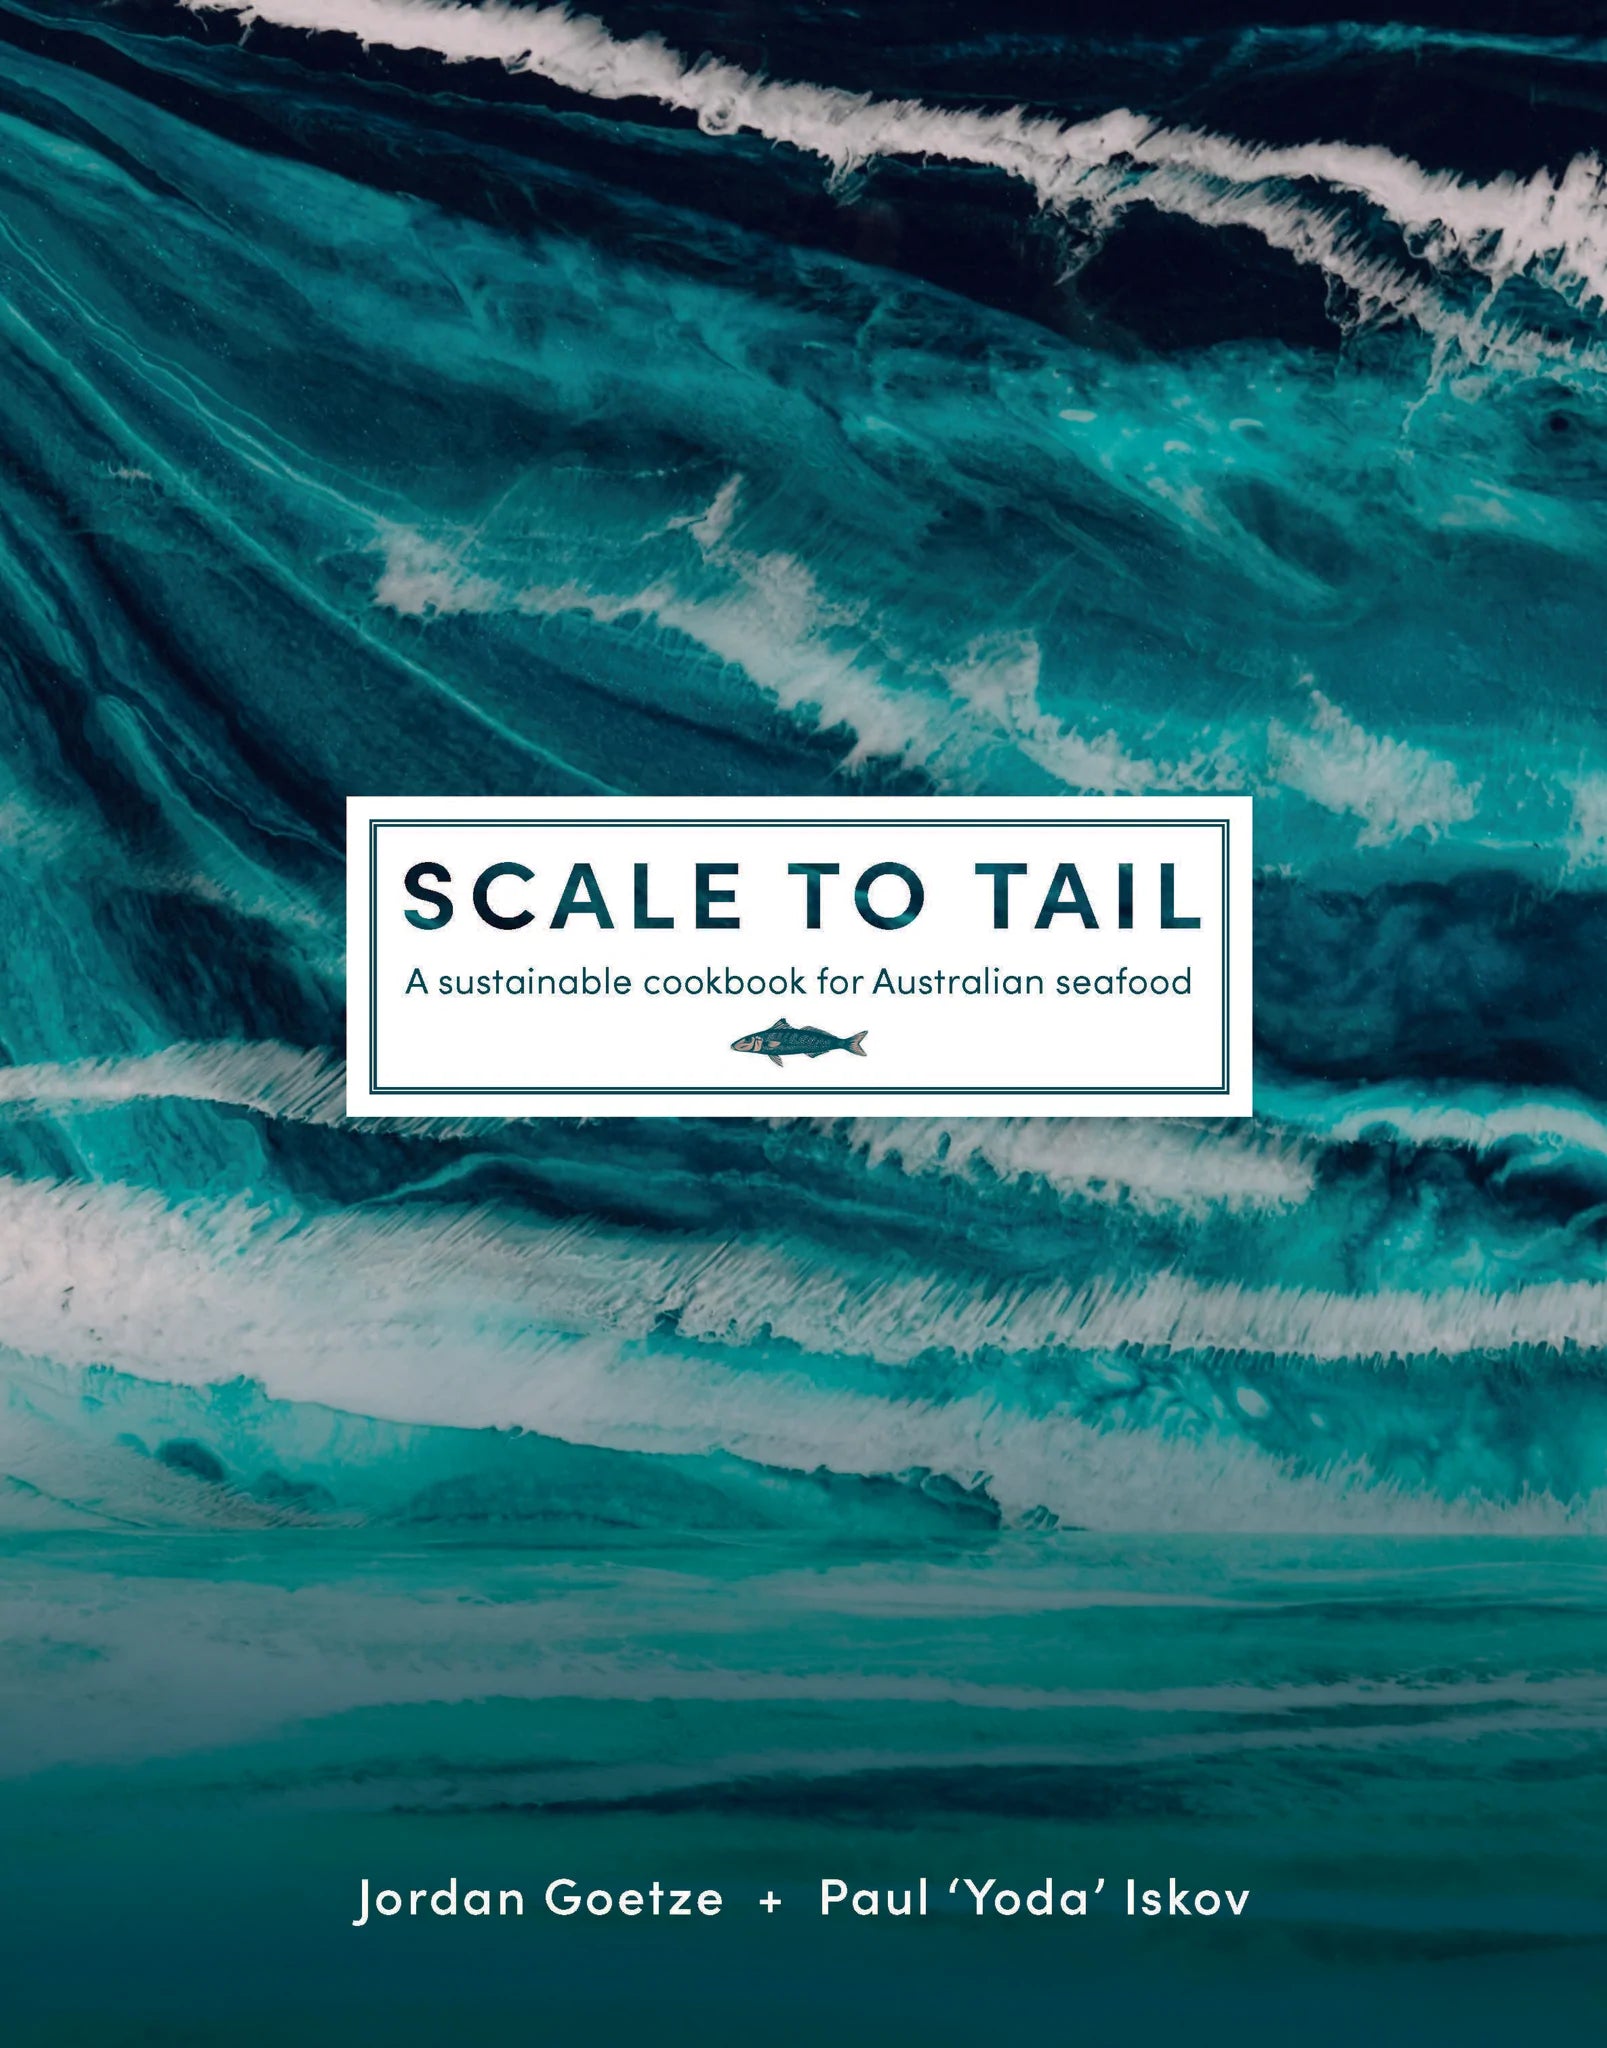 Scale to Tail: A Sustainable Cookbook for Australian Seafood